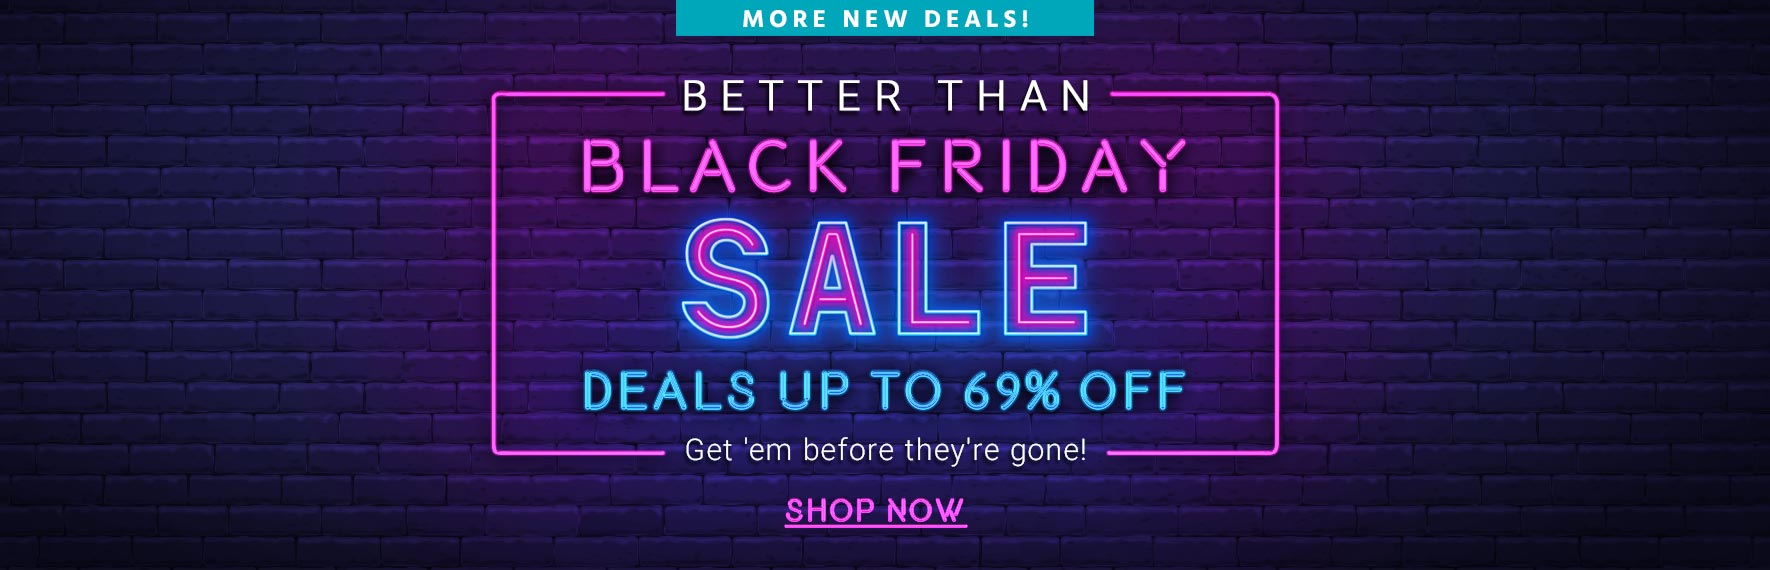 "Better than Black Friday Sale Deals up to 69% off Get 